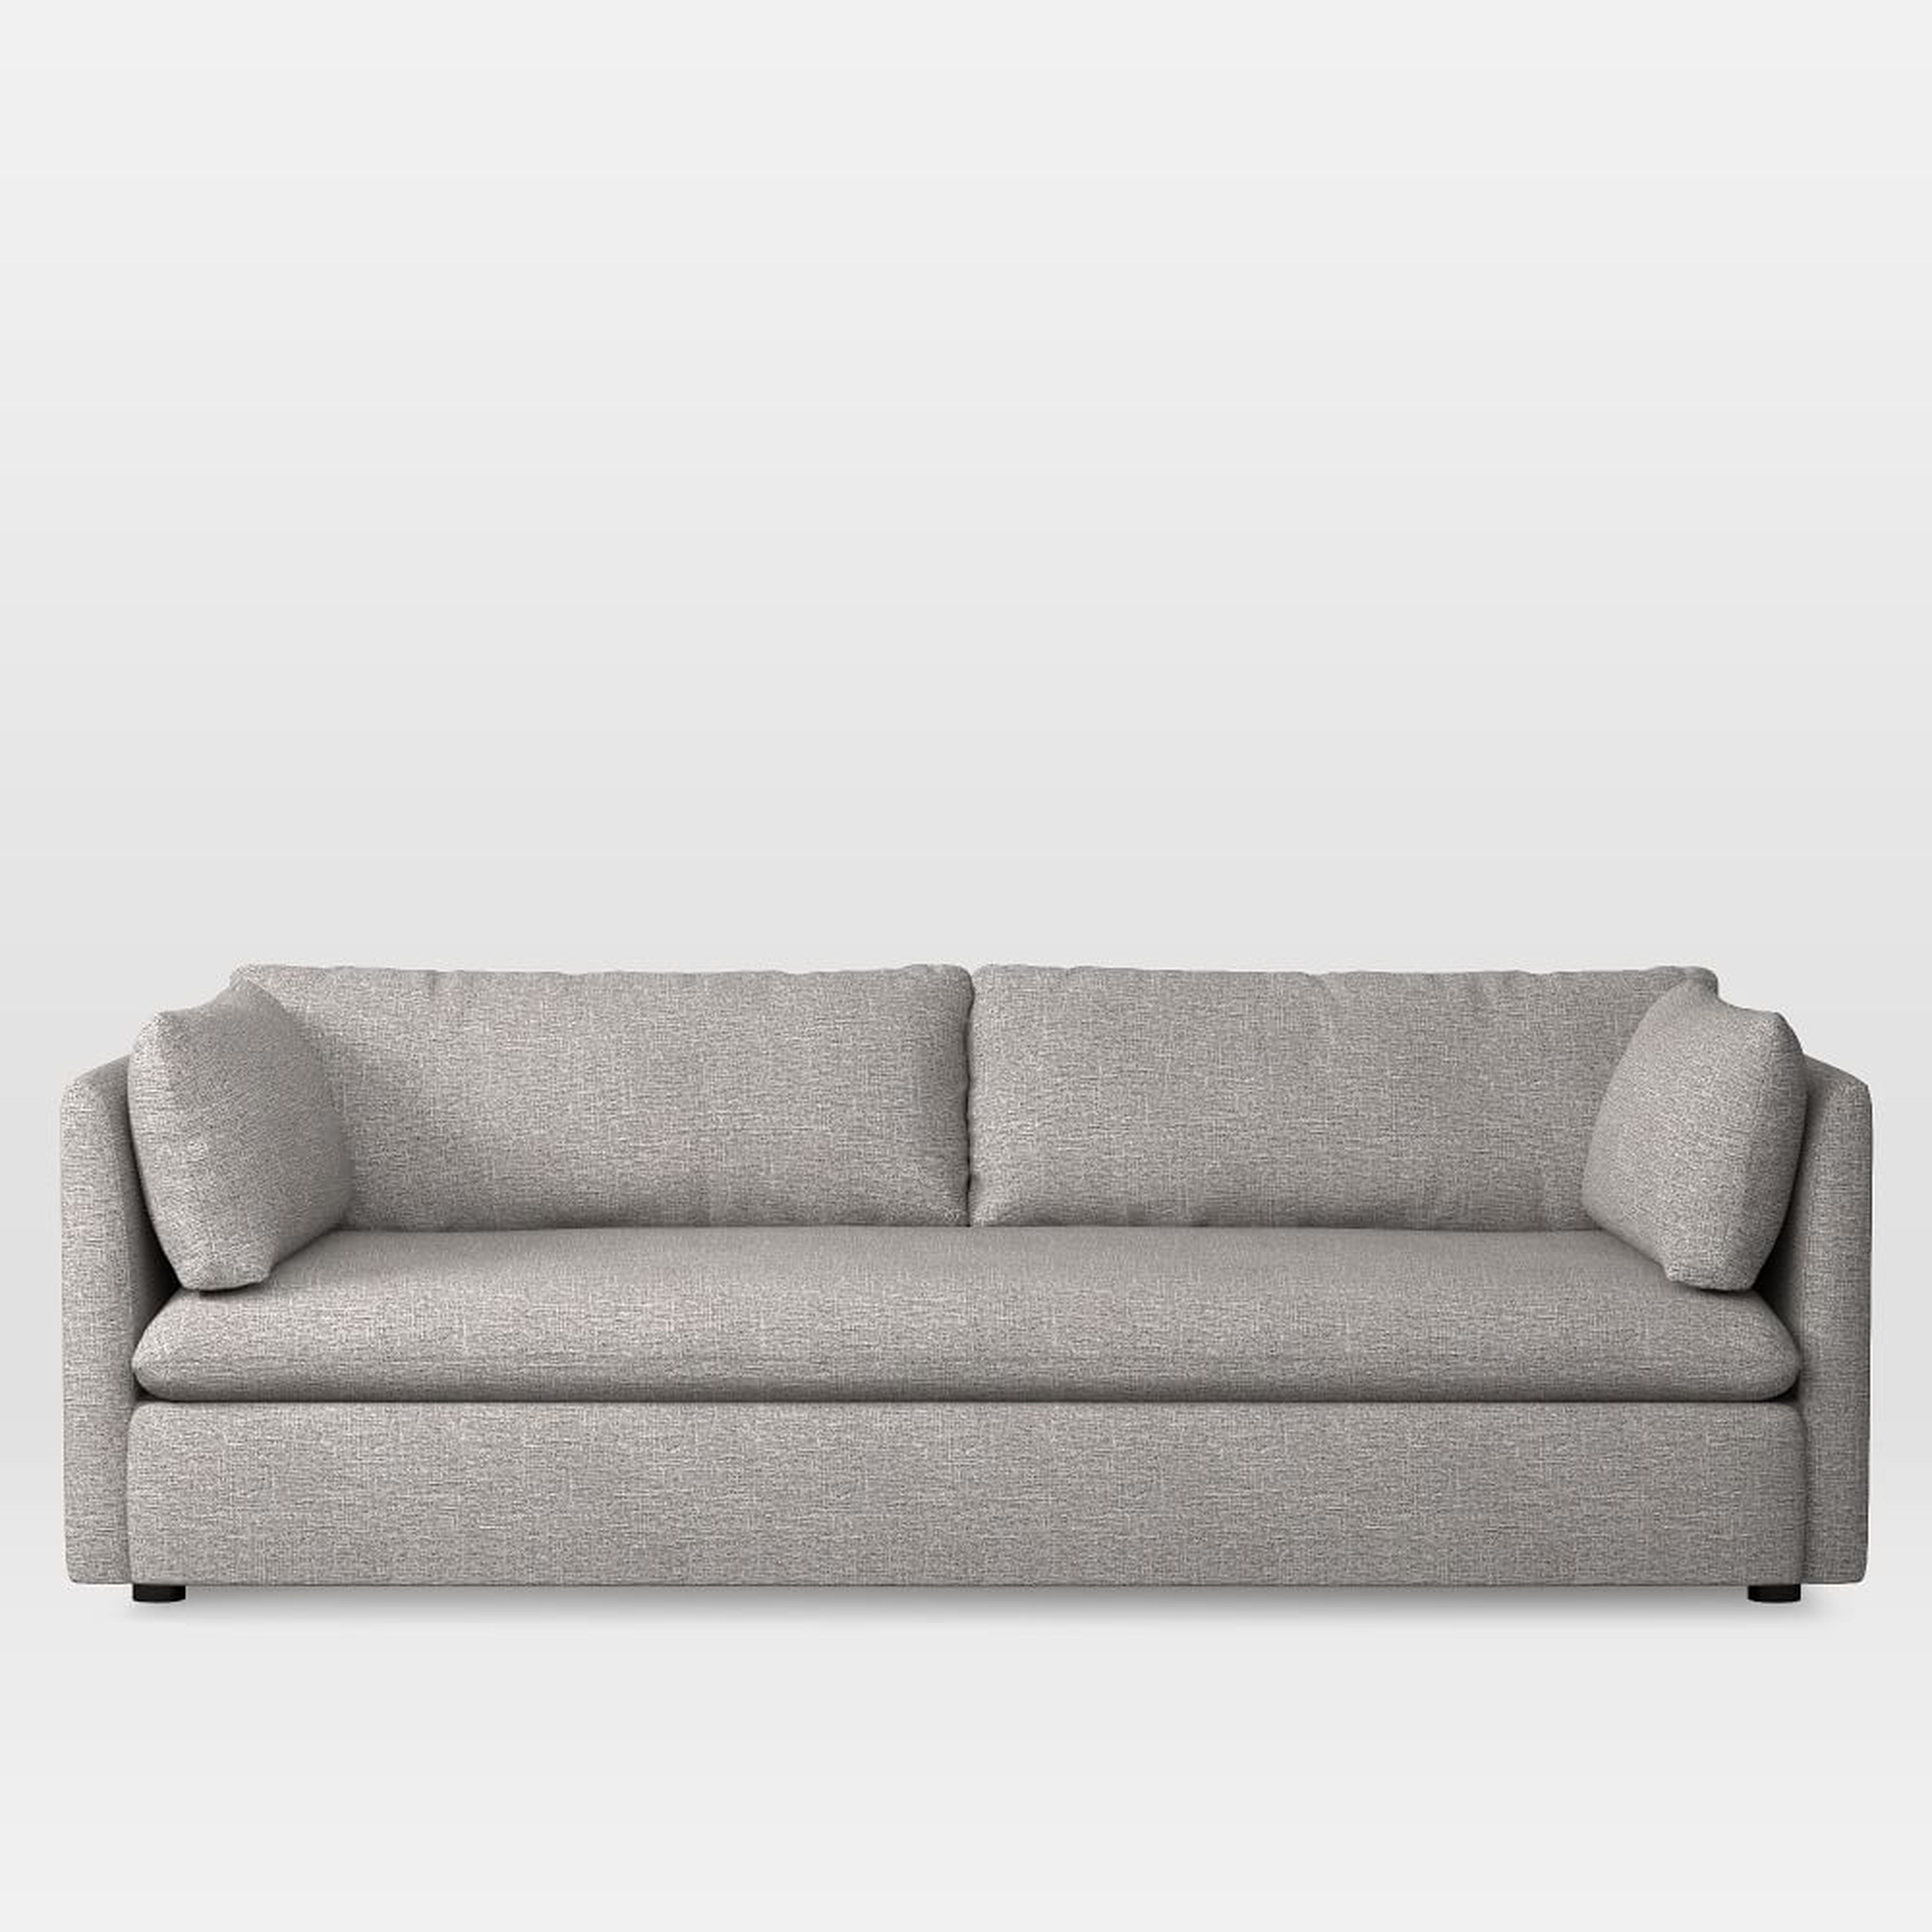 Shelter 92" Sofa, Deco Weave, Pearl Gray - West Elm